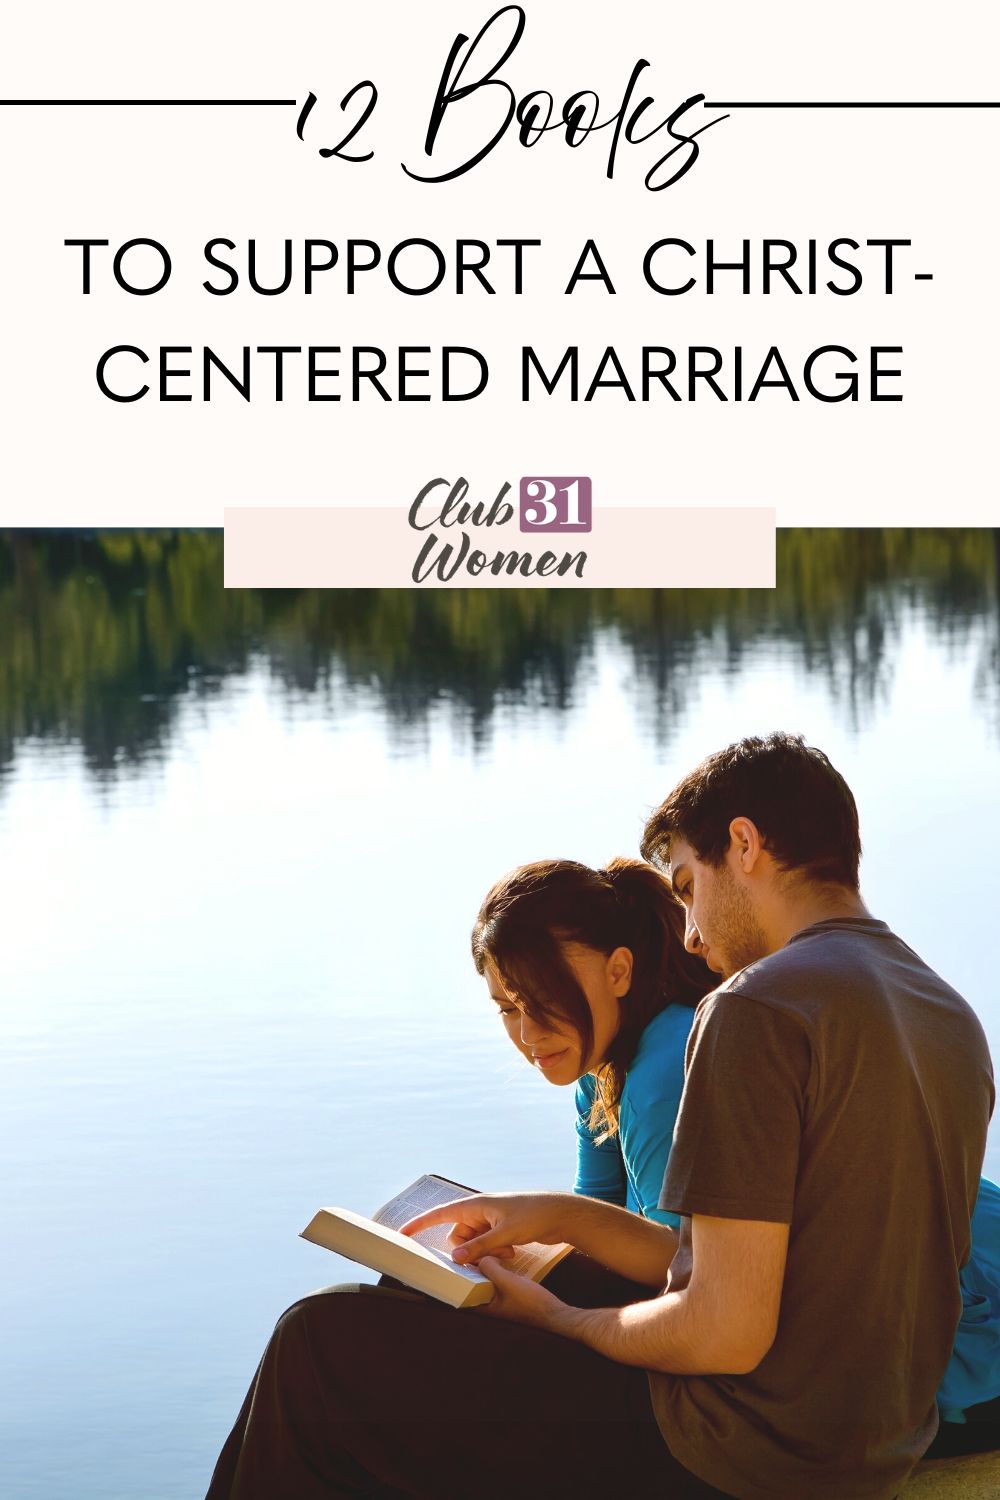 A Christ-centered marriage doesn't just happen and sometimes we need a little direction to help cultivate it. Help is here... via @Club31Women